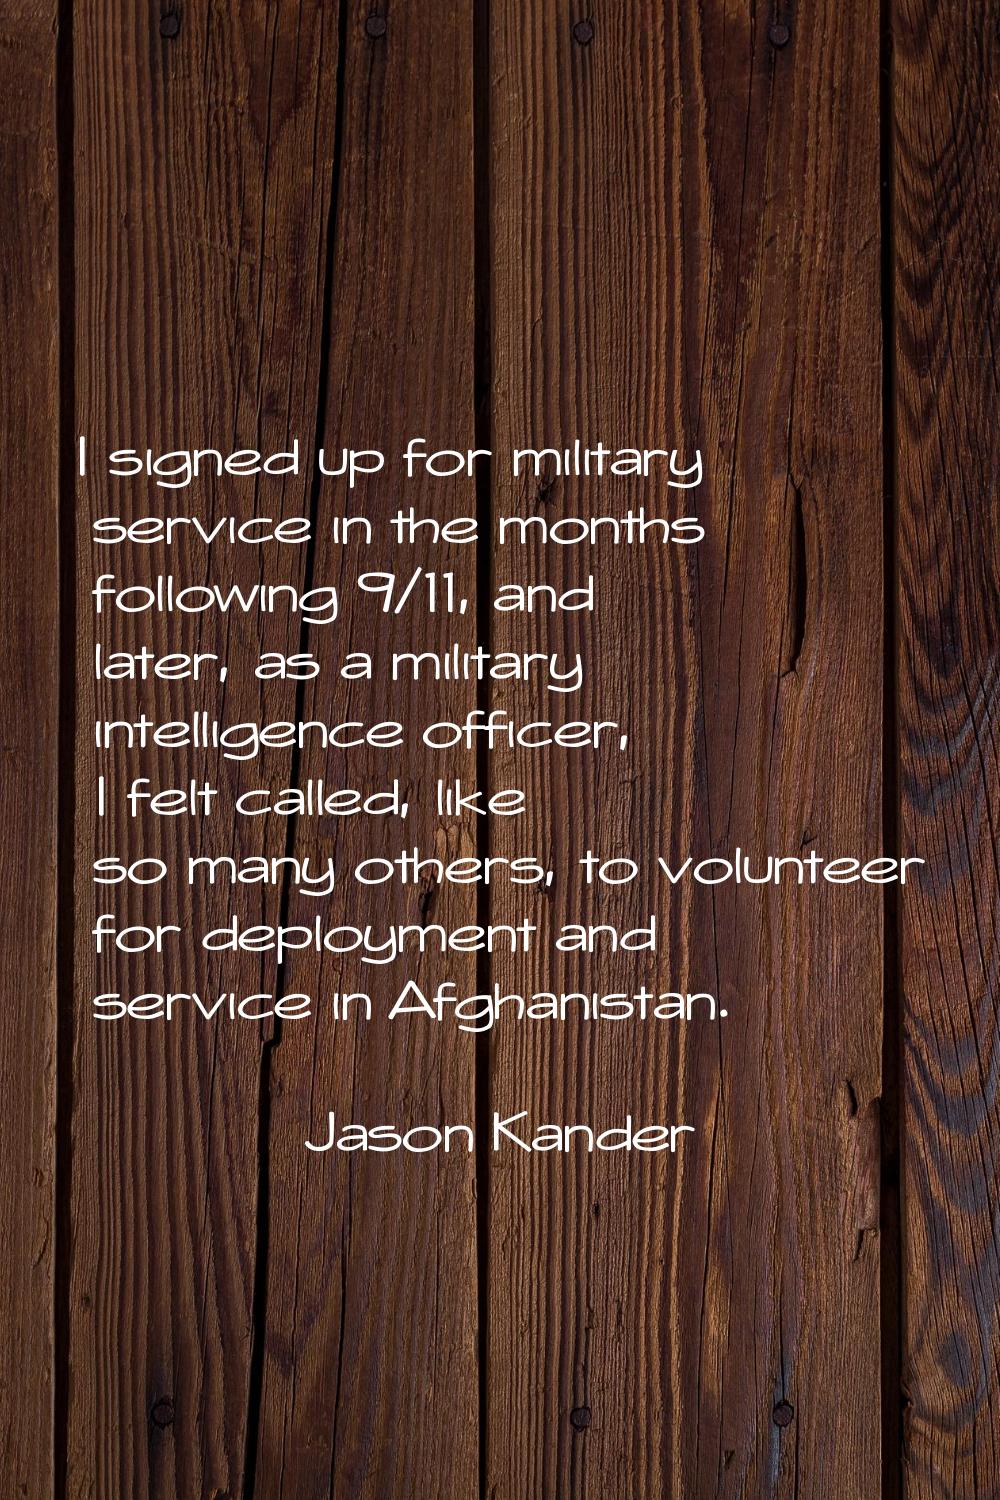 I signed up for military service in the months following 9/11, and later, as a military intelligenc